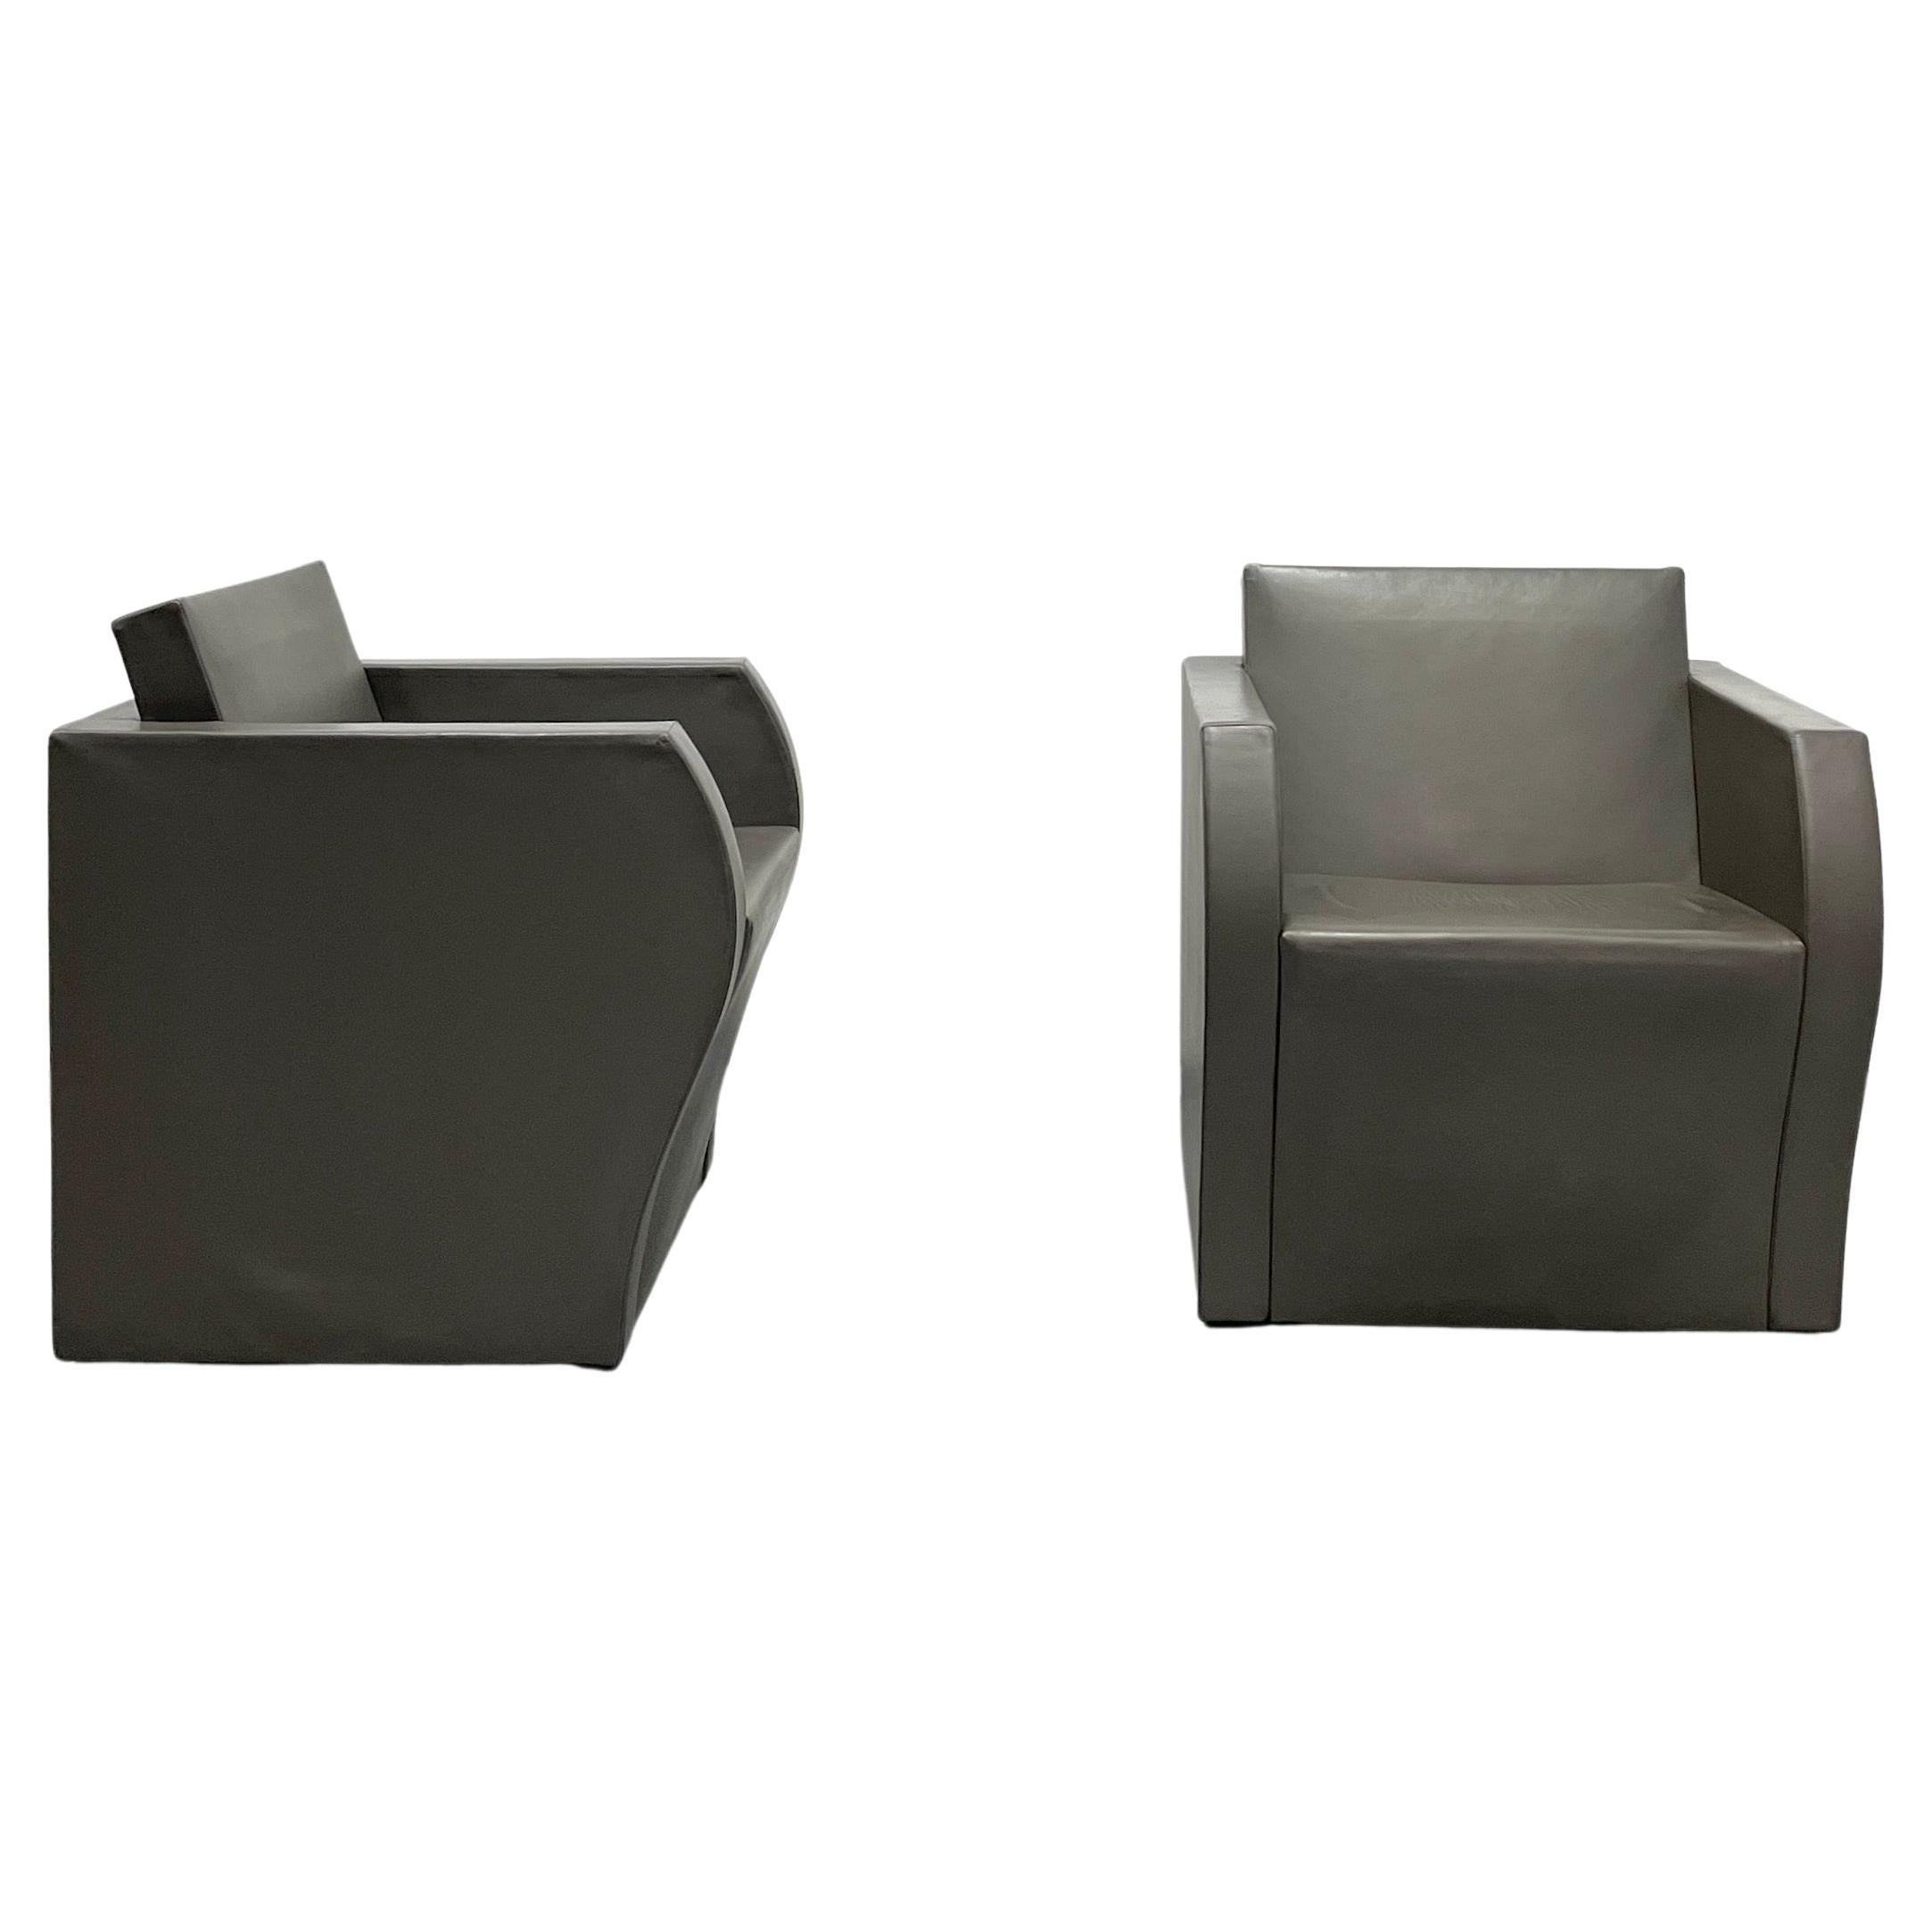 Pair of Simple Bridge Armchairs in Skai by Jean Nouvel, 1991 For Sale